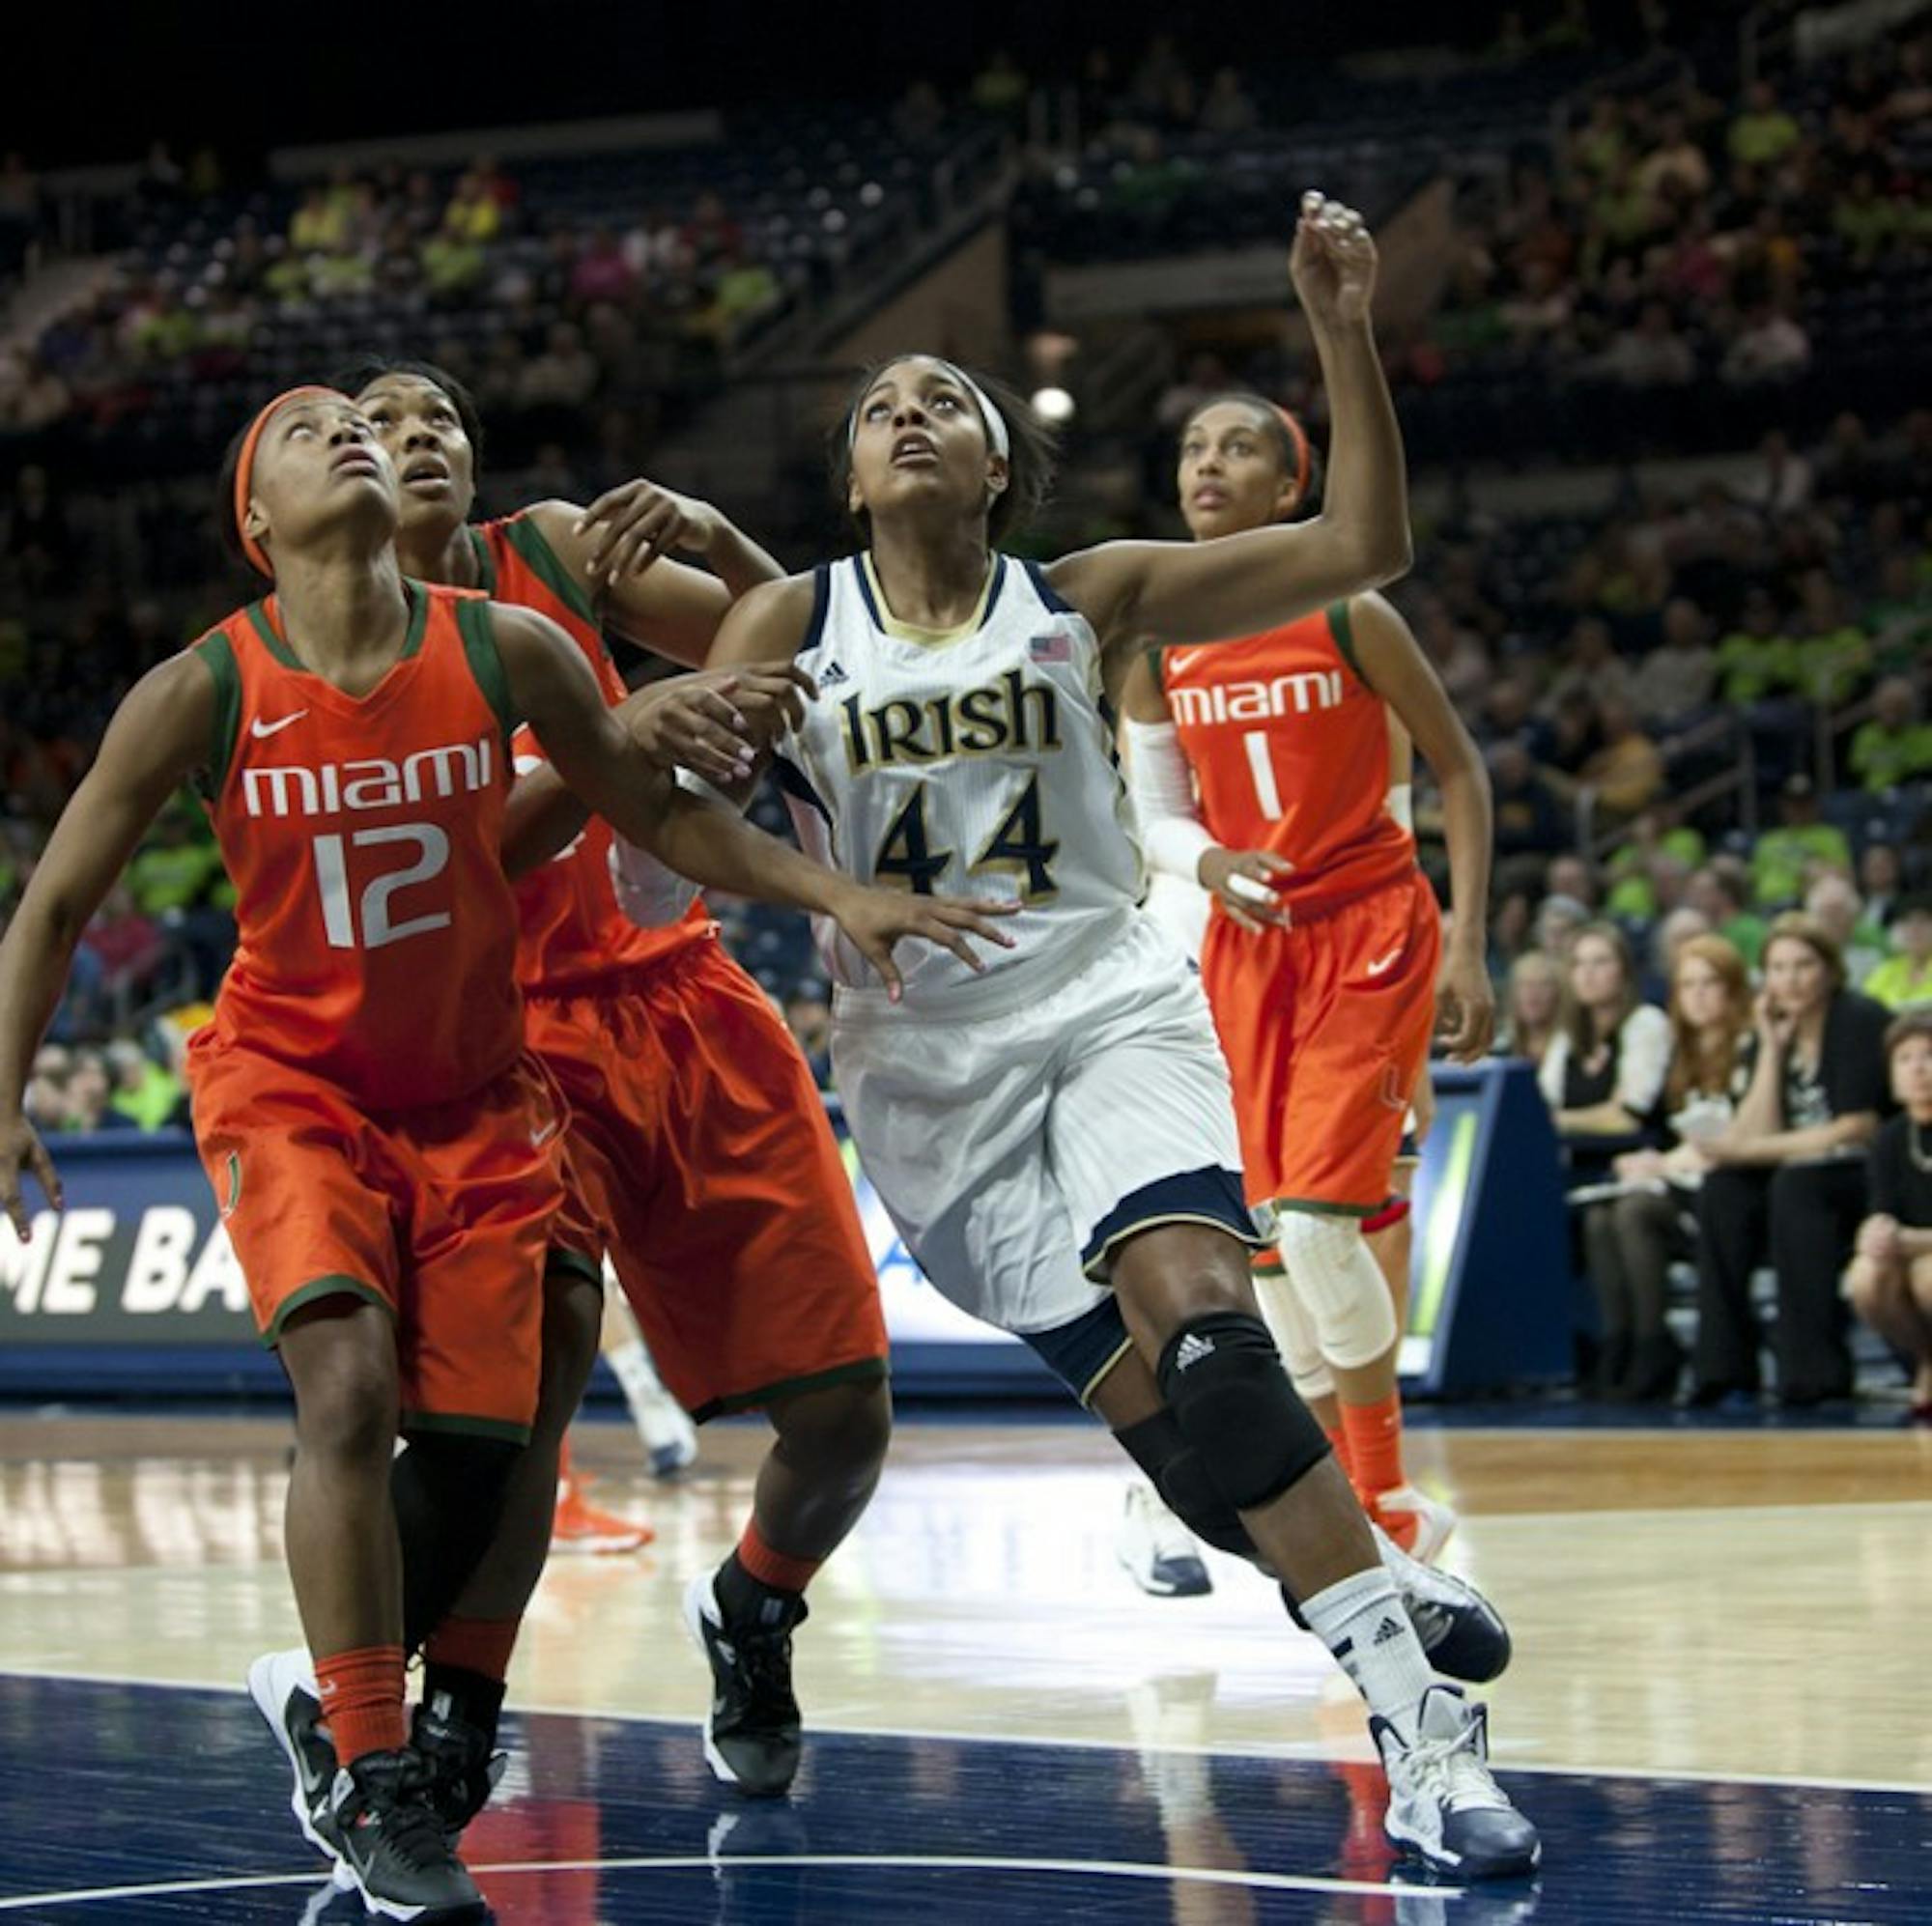 Senior forward Ariel Braker goes for a rebound during Notre Dame’s 79-52 win over Miami on Jan. 23 in Purcell Pavilion.